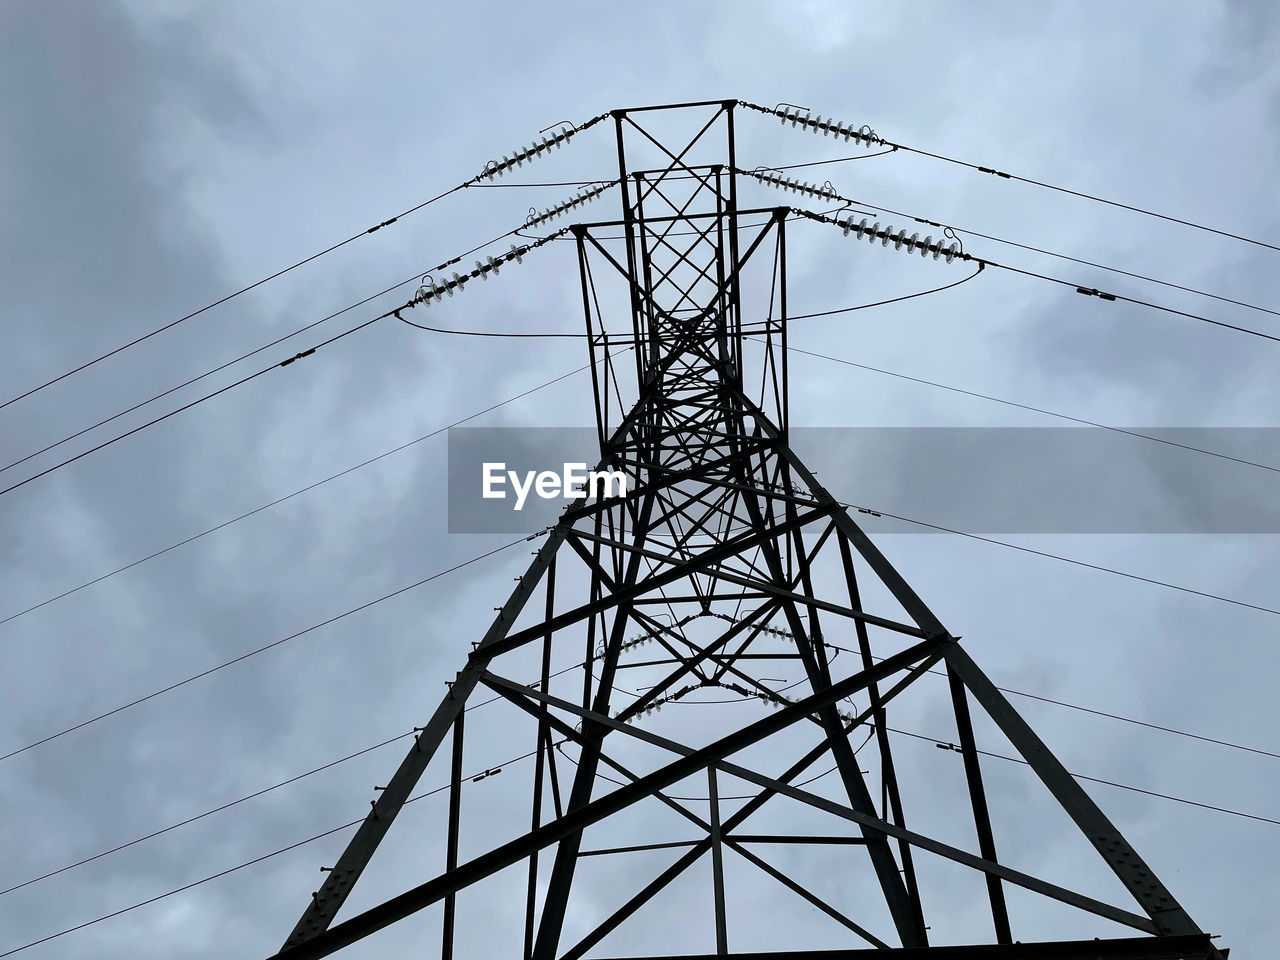 LOW ANGLE VIEW OF POWER LINES AGAINST SKY